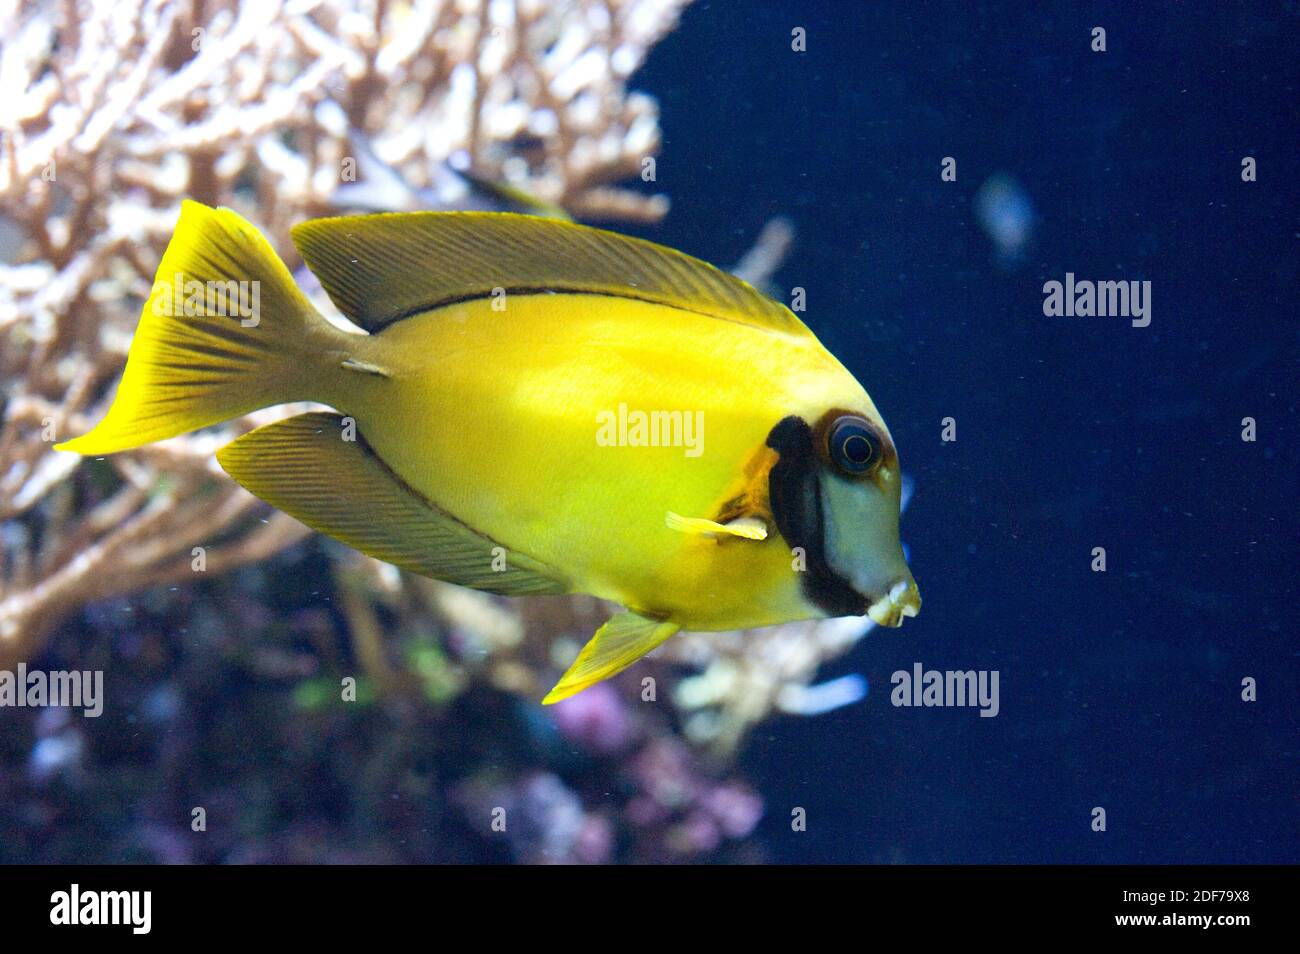 Mimic surgeonfish (Acanthurus pyroferus) is a tropical sea fish native to Indo-Pacific Ocean. Stock Photo